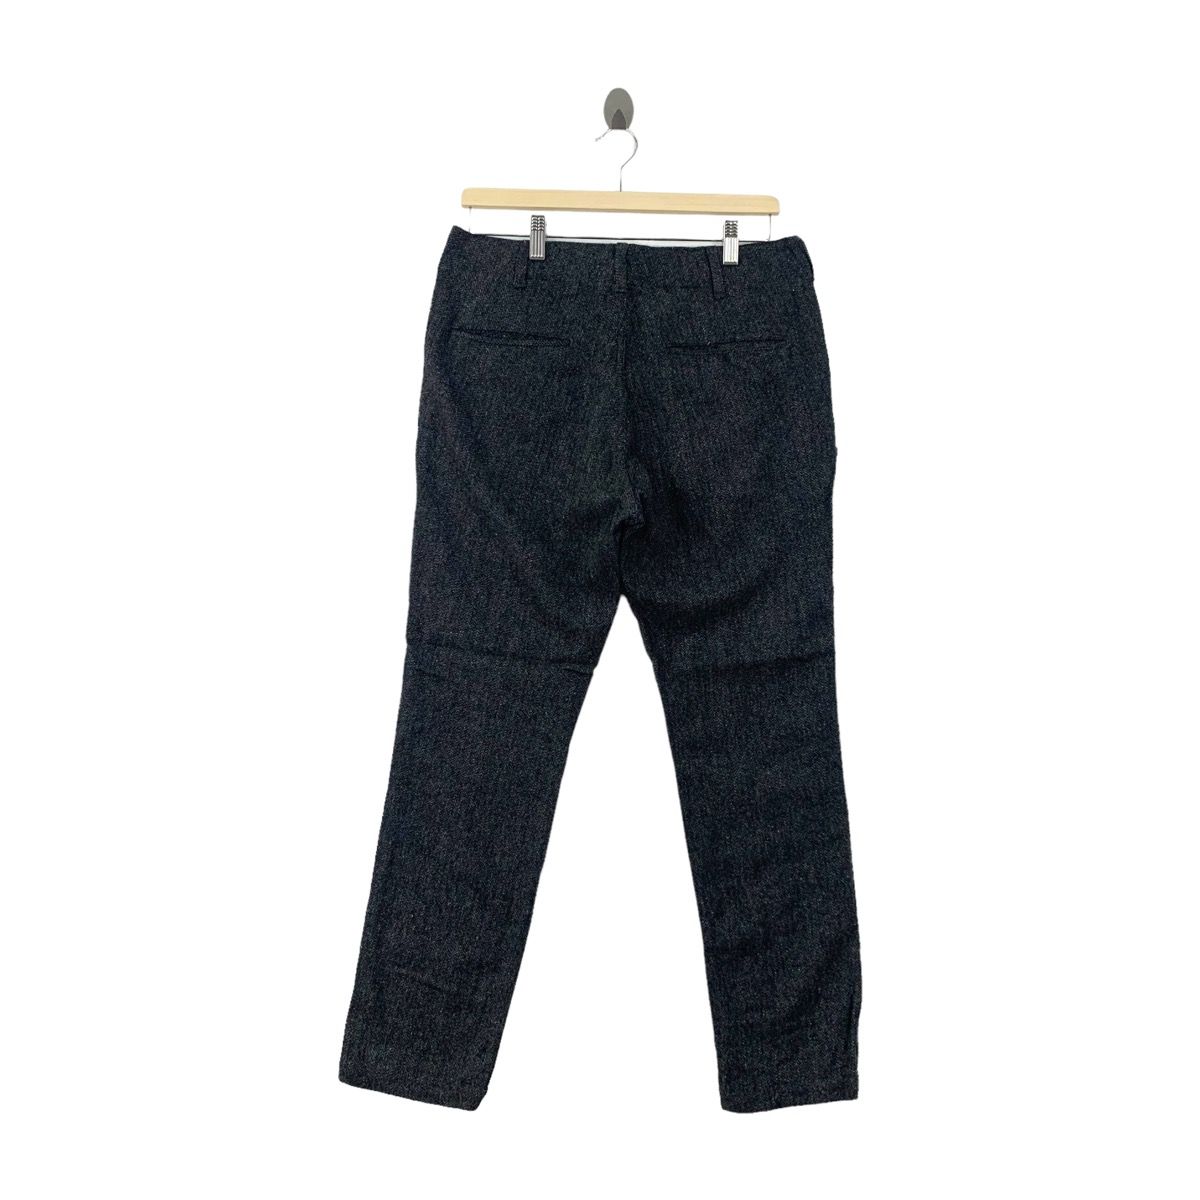 Beauty & Youth BEAUTY & YOUTH United Arrows Japanese Brand Wool Trouser Size US 32 / EU 48 - 5 Thumbnail